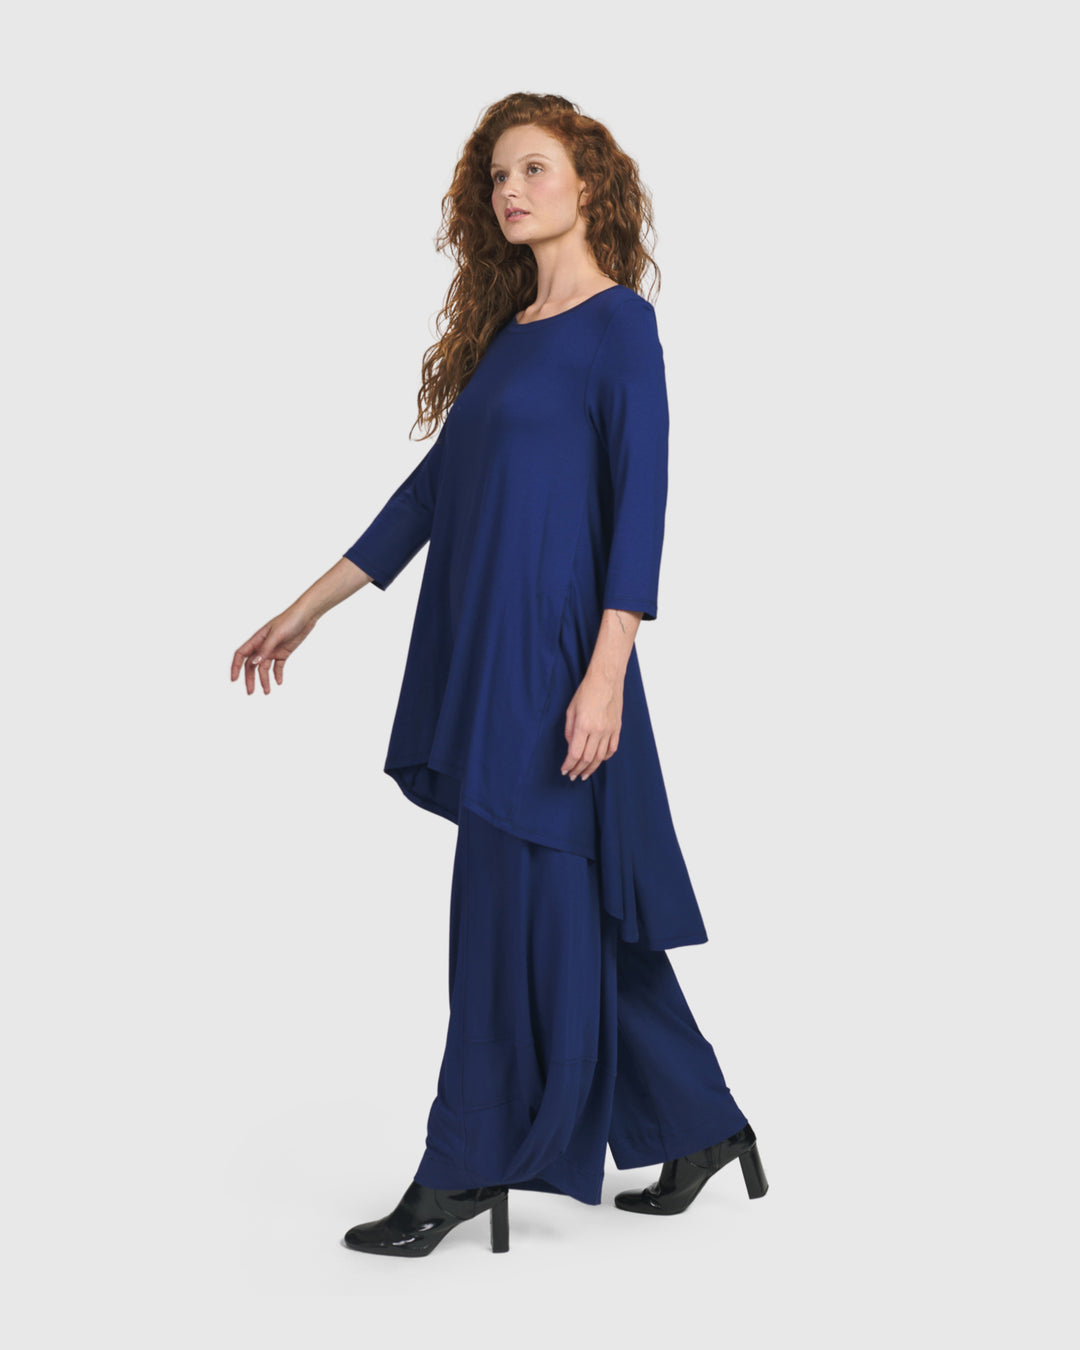 Essential Swing Tunic Top, Royal Blue